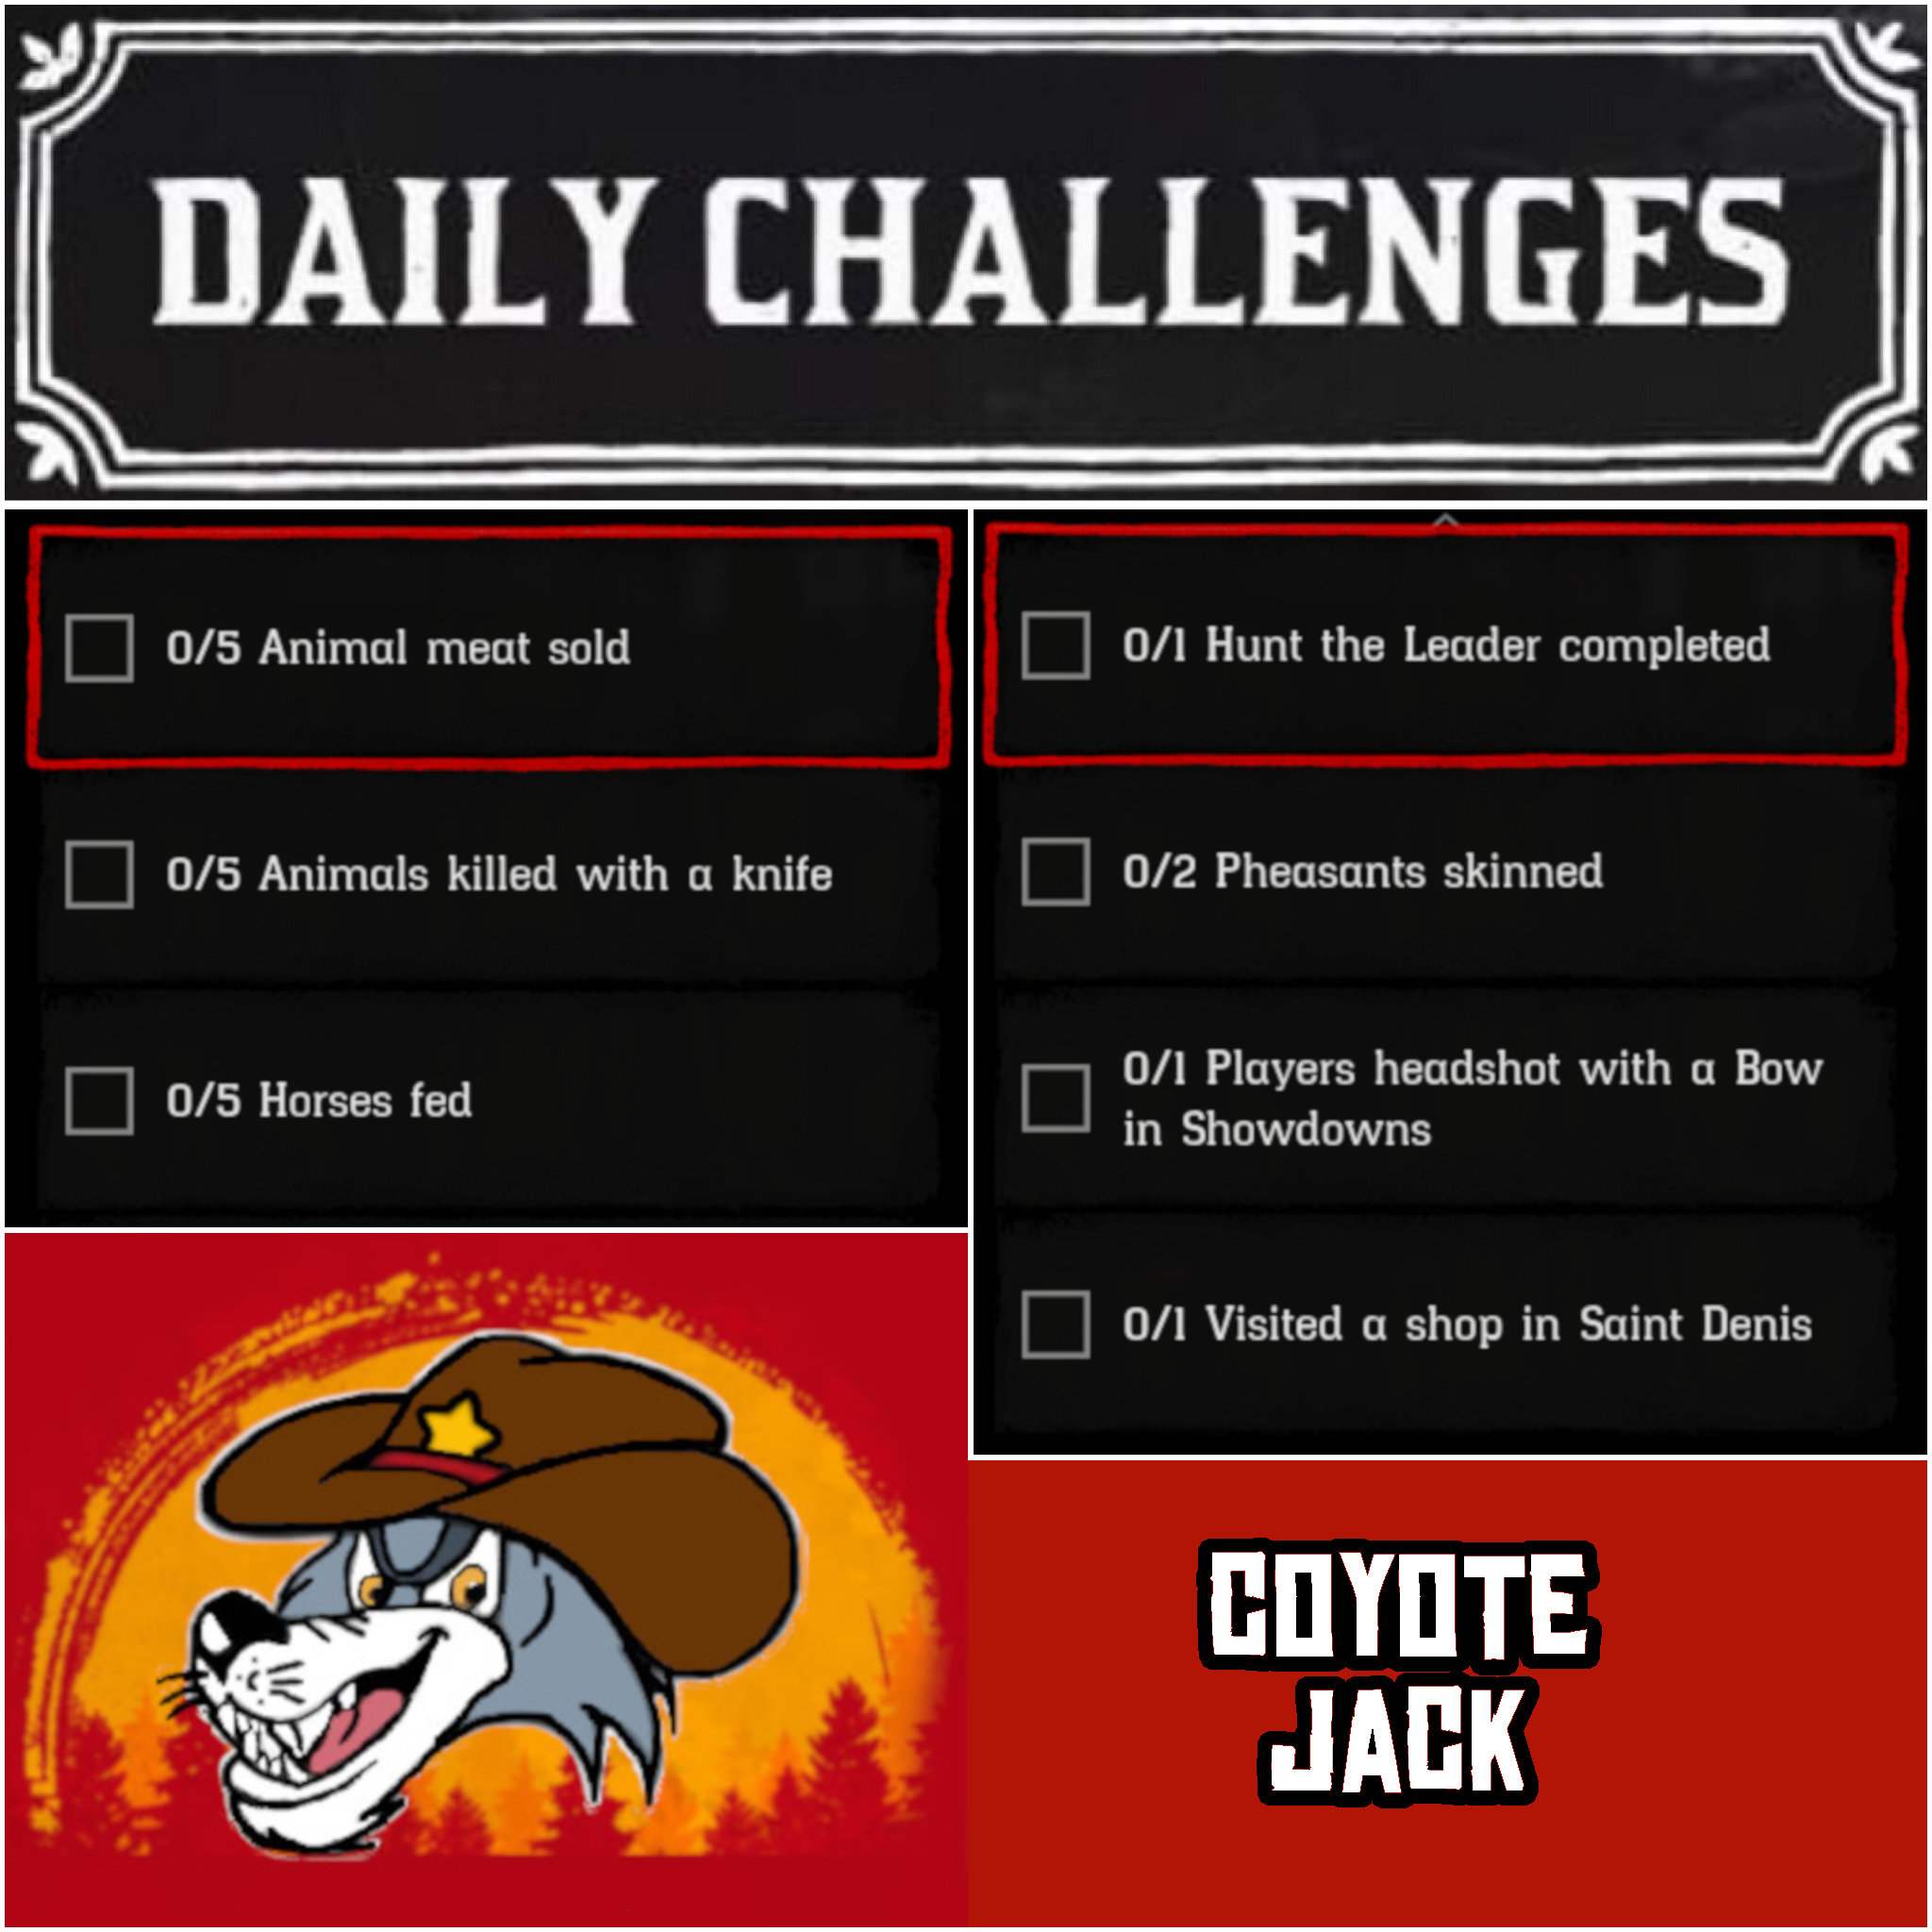 You are currently viewing Monday 02 November Daily Challenges